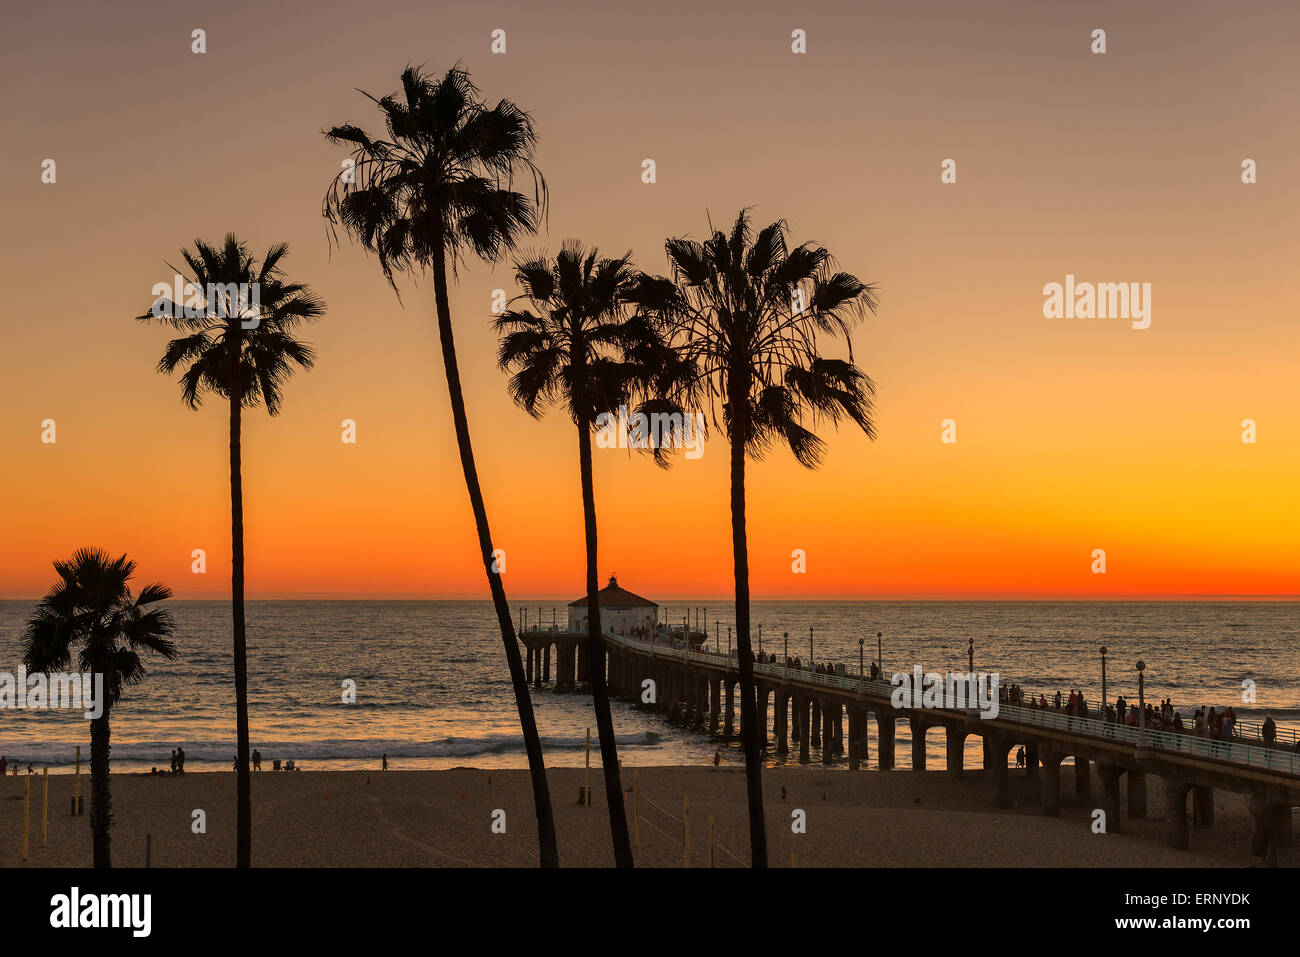 The palm trees in Manhattan Beach and Pier under a orange sunset, Los Angeles, California. Stock Photo